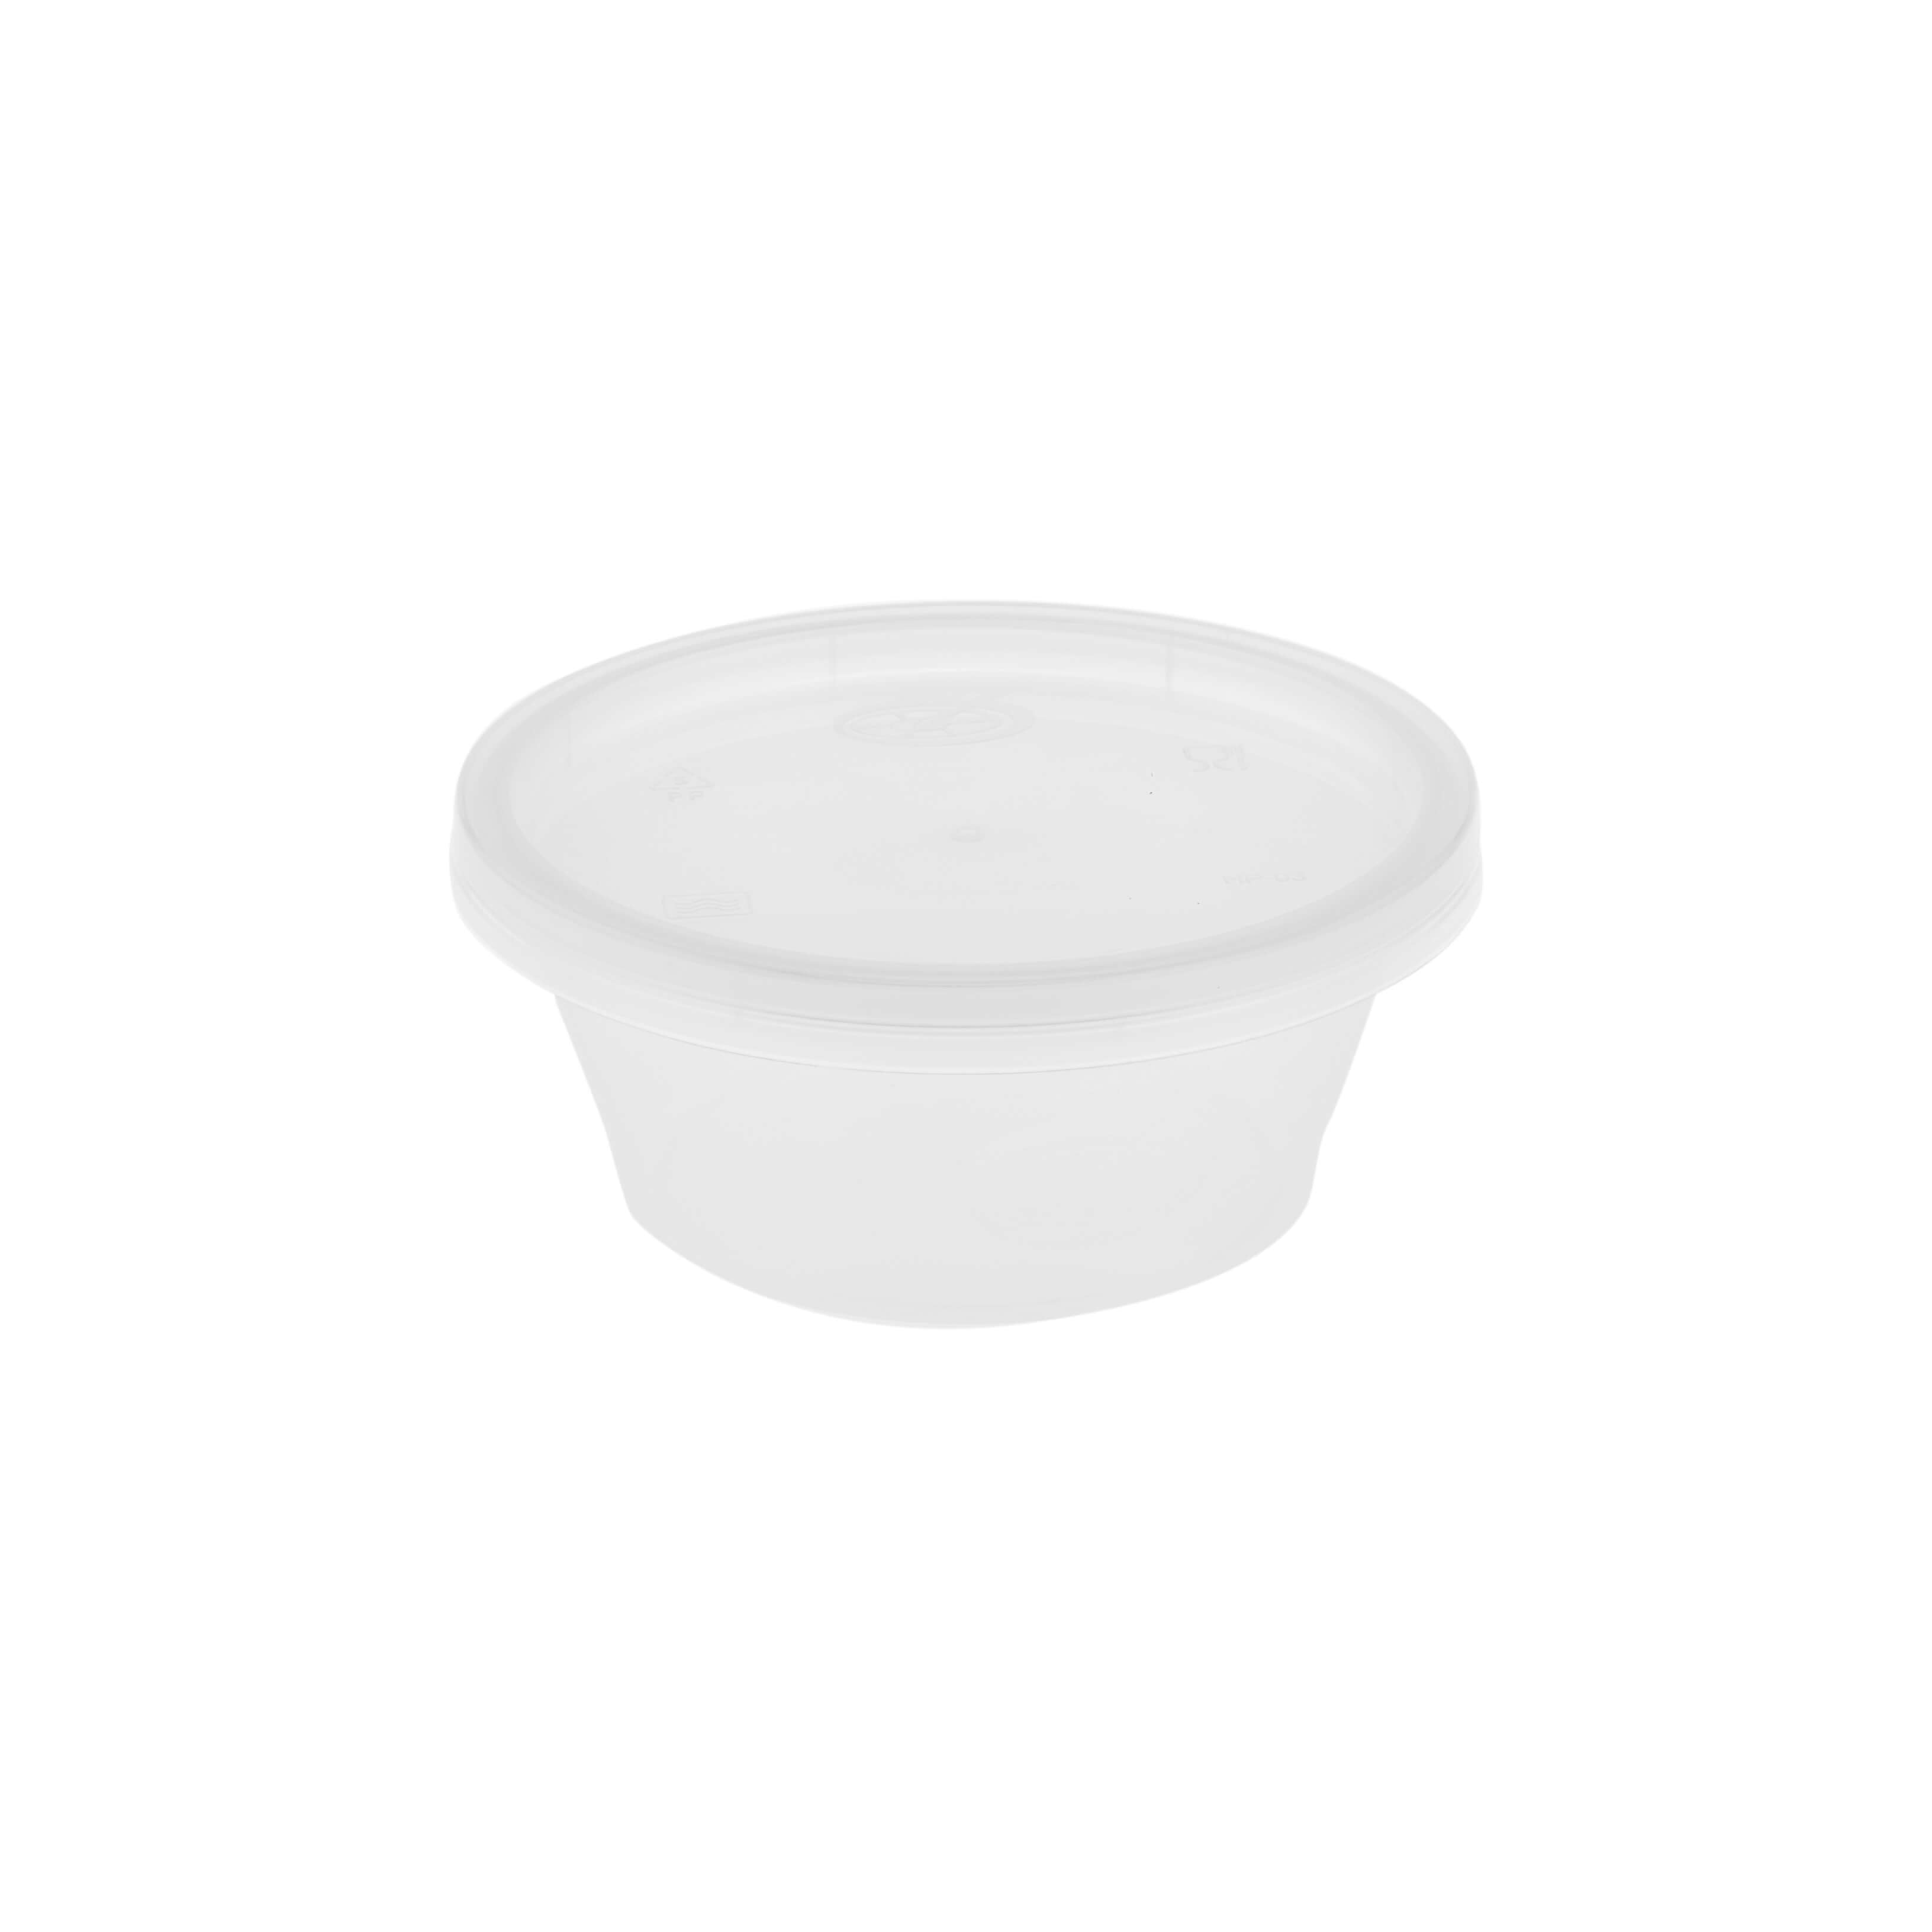 60ml clear Microwave Portion Cup With Lid - Hotpack Global